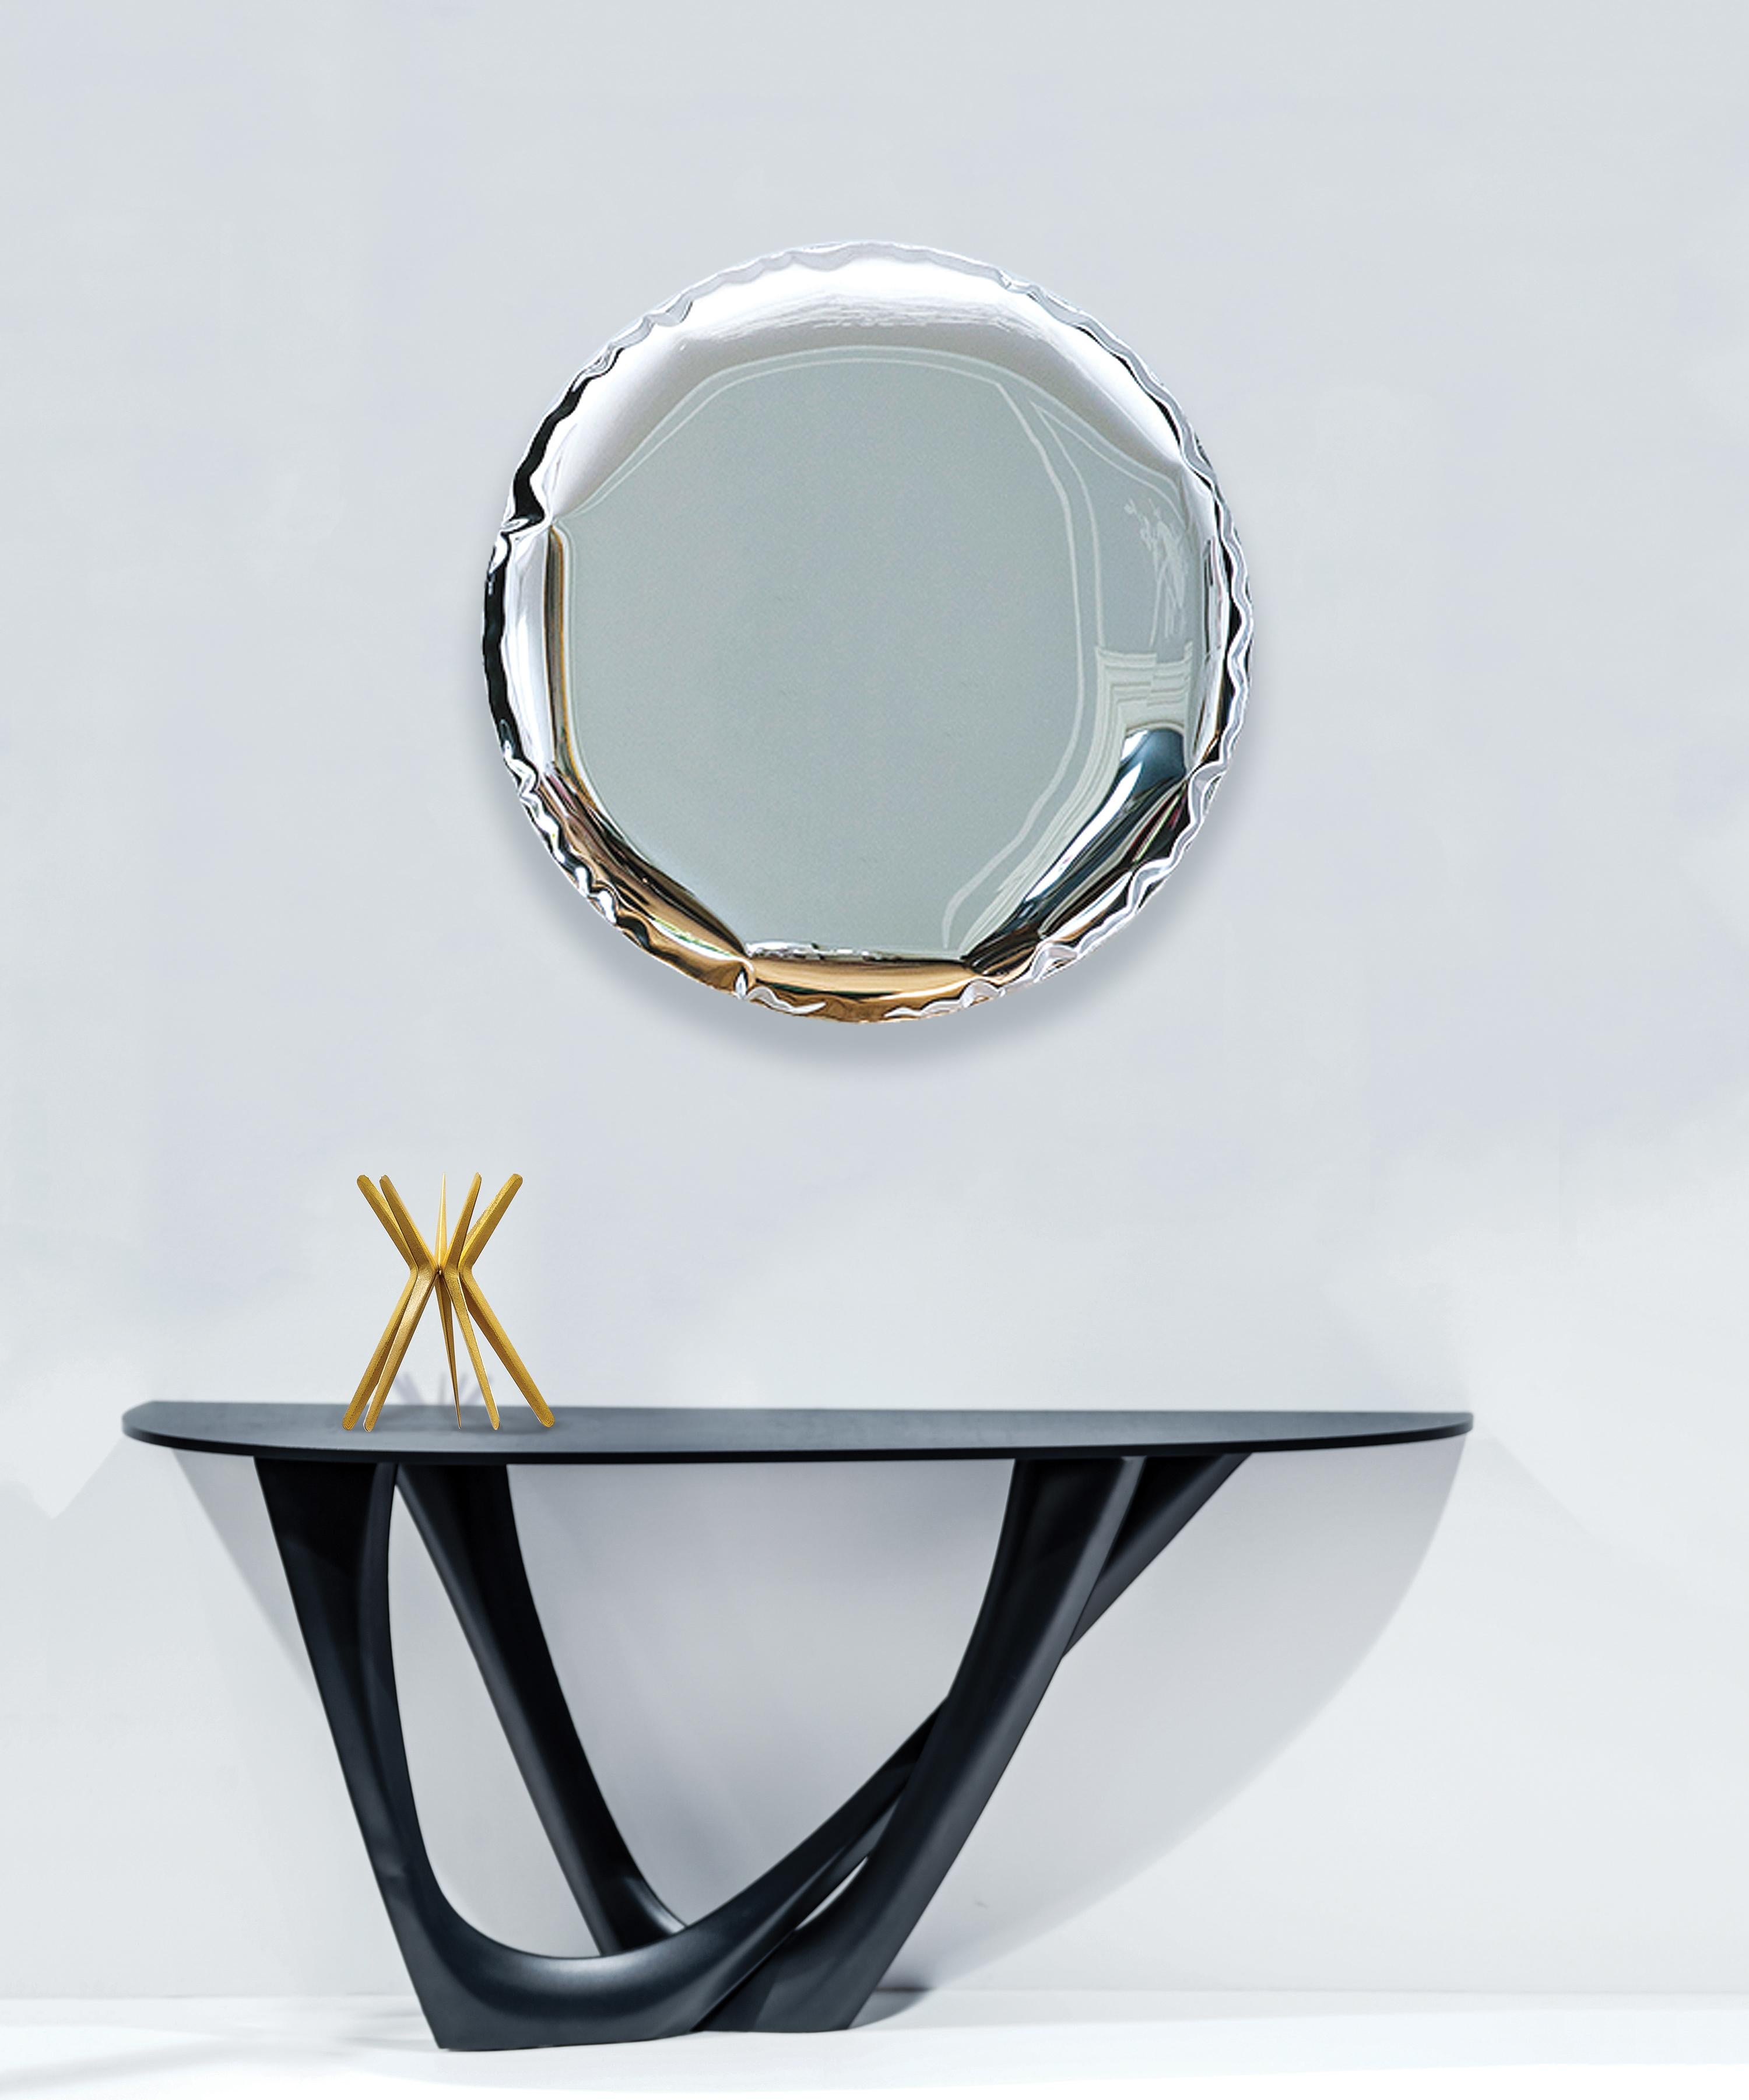 Helix Nebula Topaz Sapphire Oko 150 Sculptural Wall Mirror by Zieta
Dimensions: ø 150 x D 6 cm. 
Material: Stainless steel. 
Finish: Helix Nebula Topaz Sapphire transition. 

Available in different finishes. Also available in different sizes: ø75,